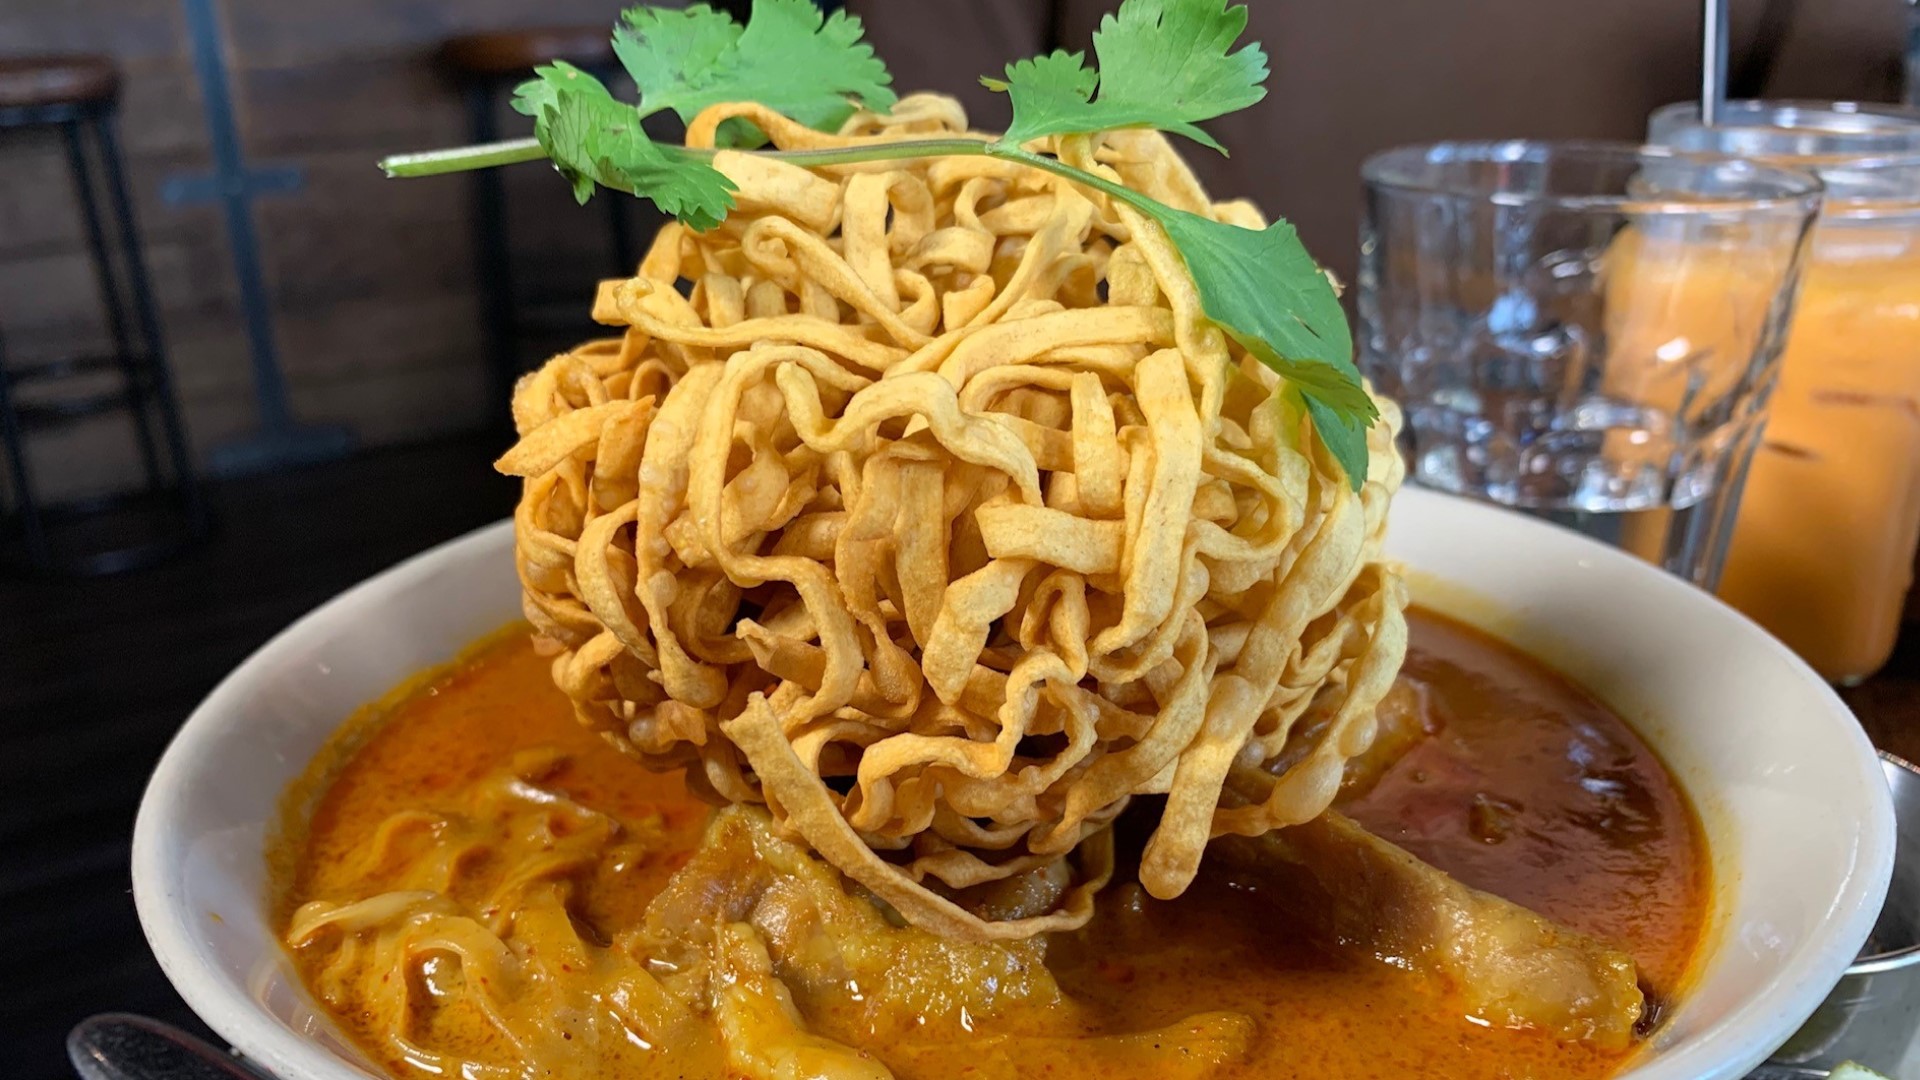 Isarn Thai Soul Kitchen in Kirkland serves regional Thai food that's sure to warm you up on a chilly day.